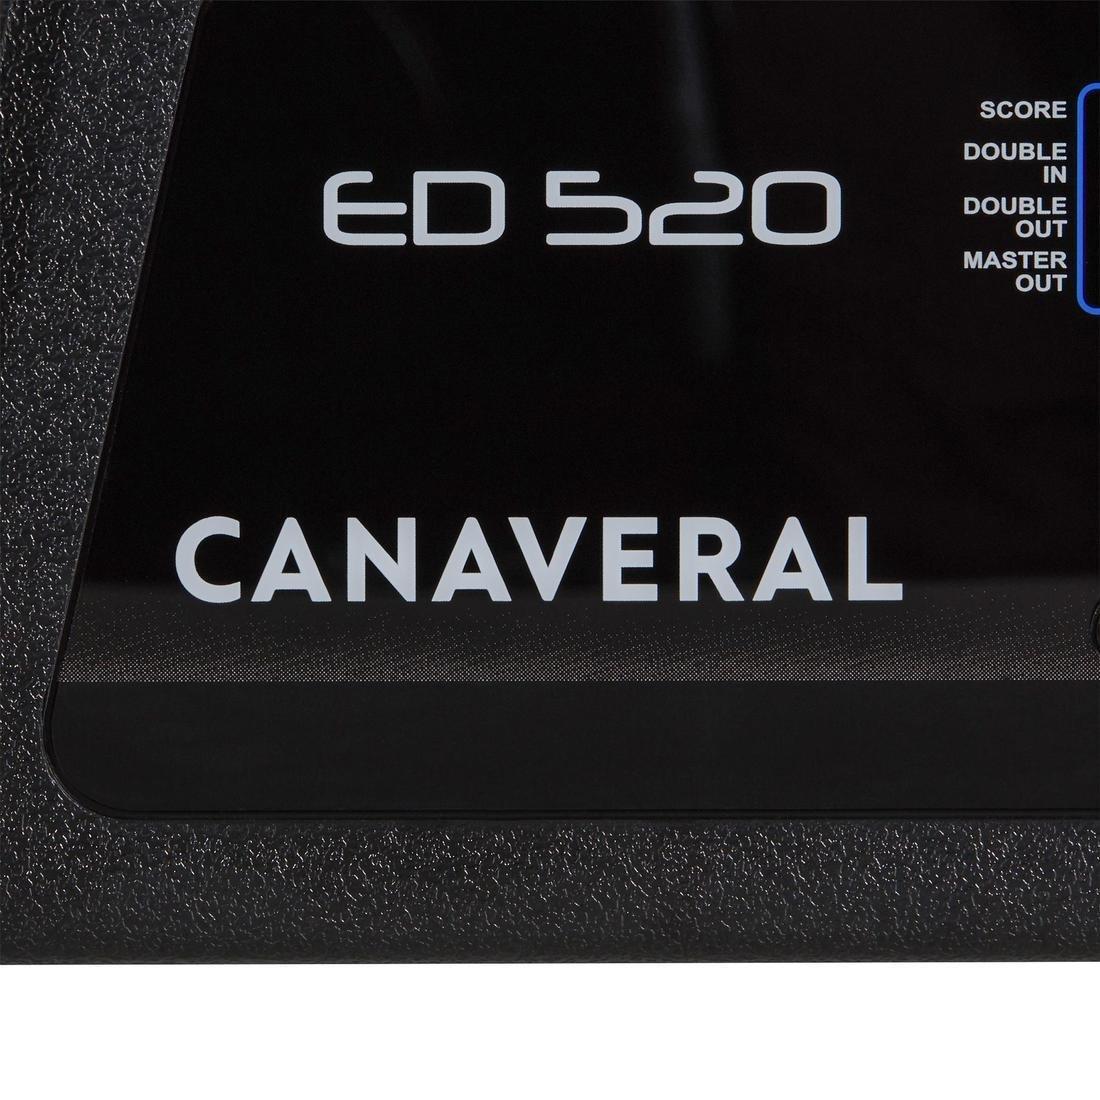 CANAVERAL - Ed520 Electronic Dartboard